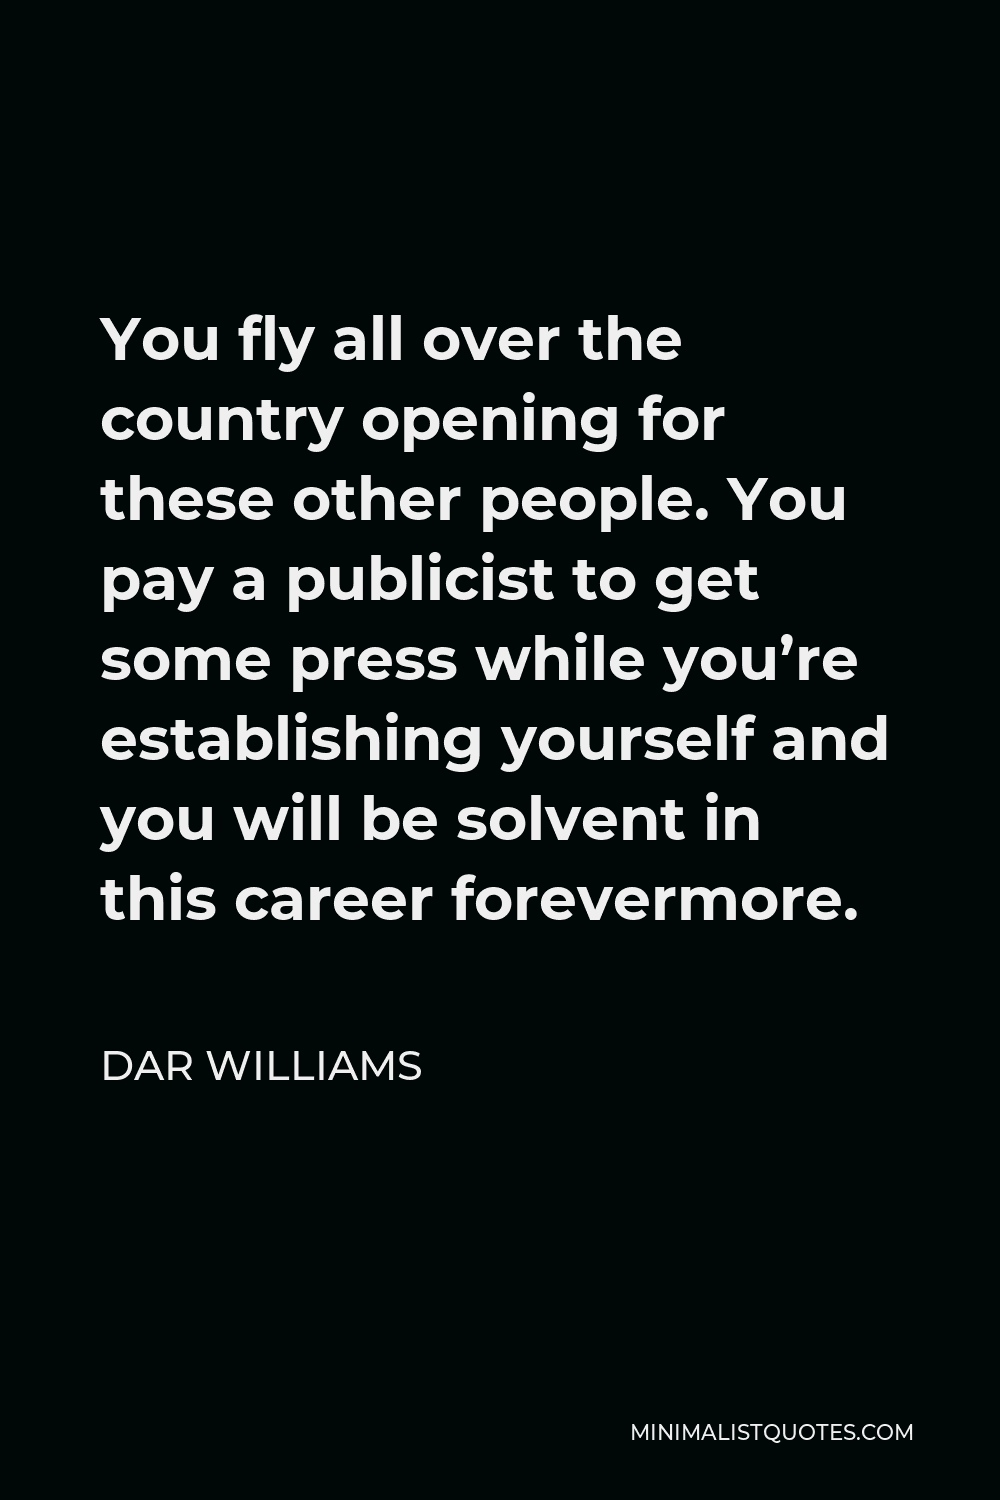 Dar Williams Quote - You fly all over the country opening for these other people. You pay a publicist to get some press while you’re establishing yourself and you will be solvent in this career forevermore.